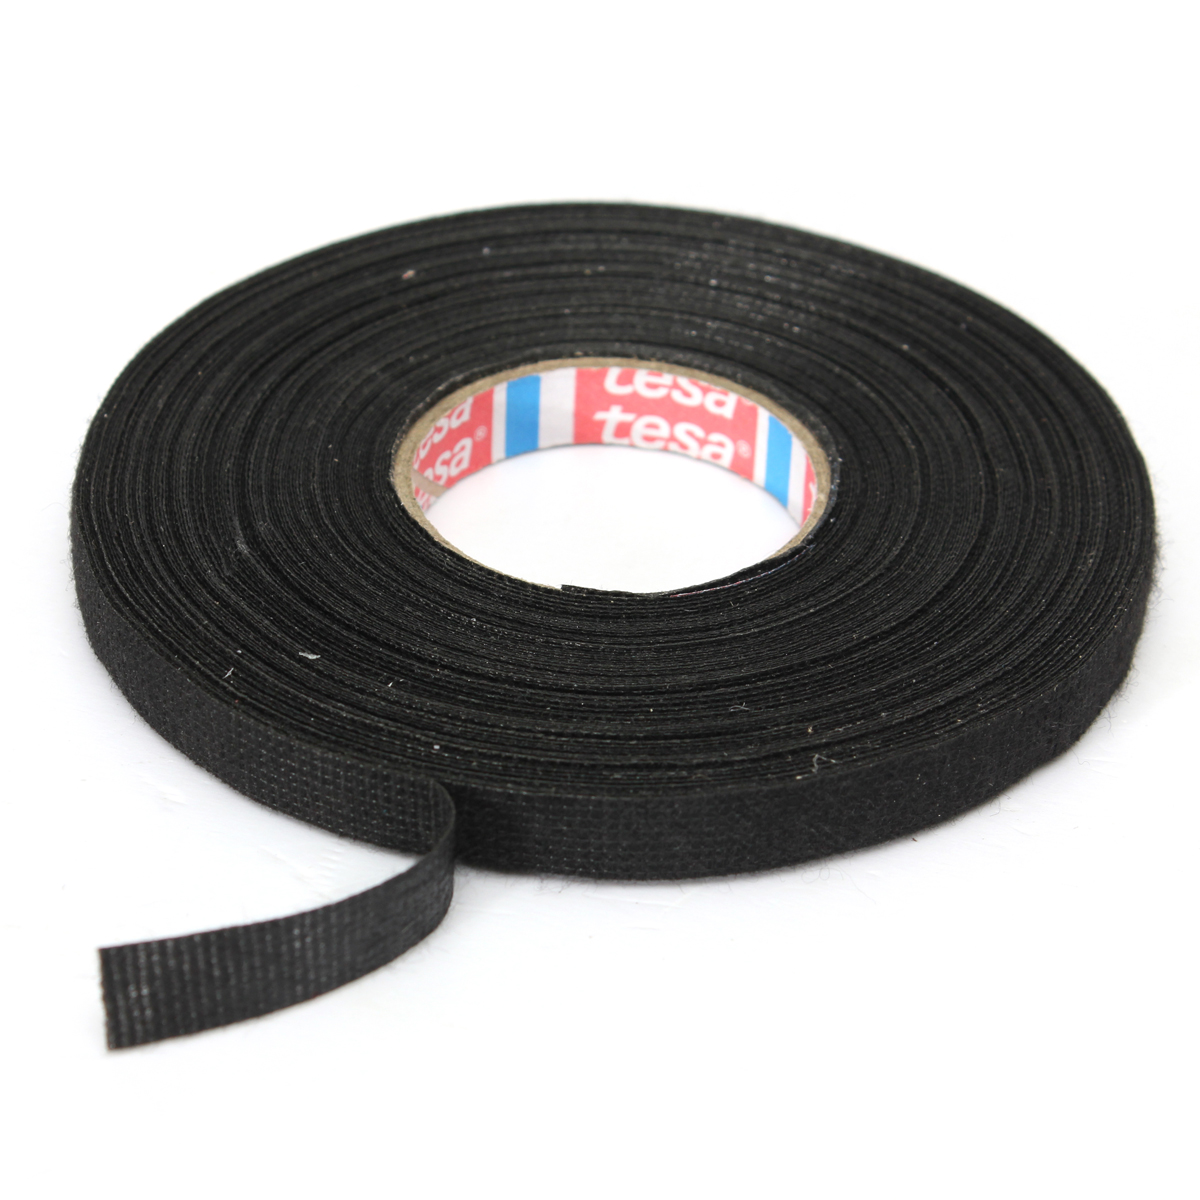 

Car Wiring Loom Harness Adhesive Cloth Fabric Tape Cable Loom 9mm x 25M Black